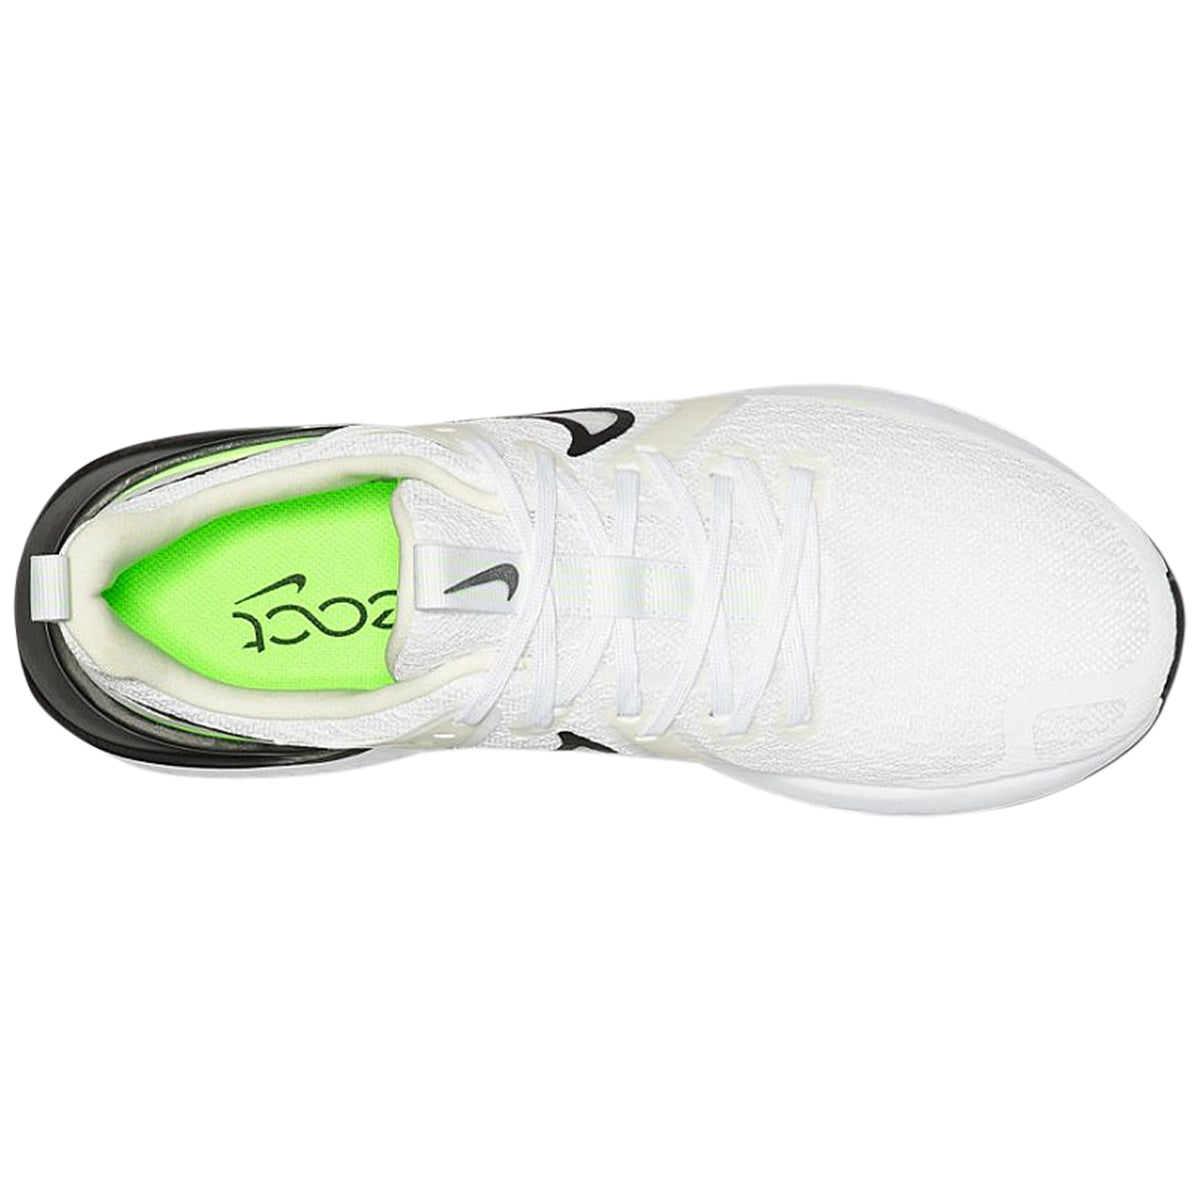 Nike Legend React 2 Mens Style : At1368-101